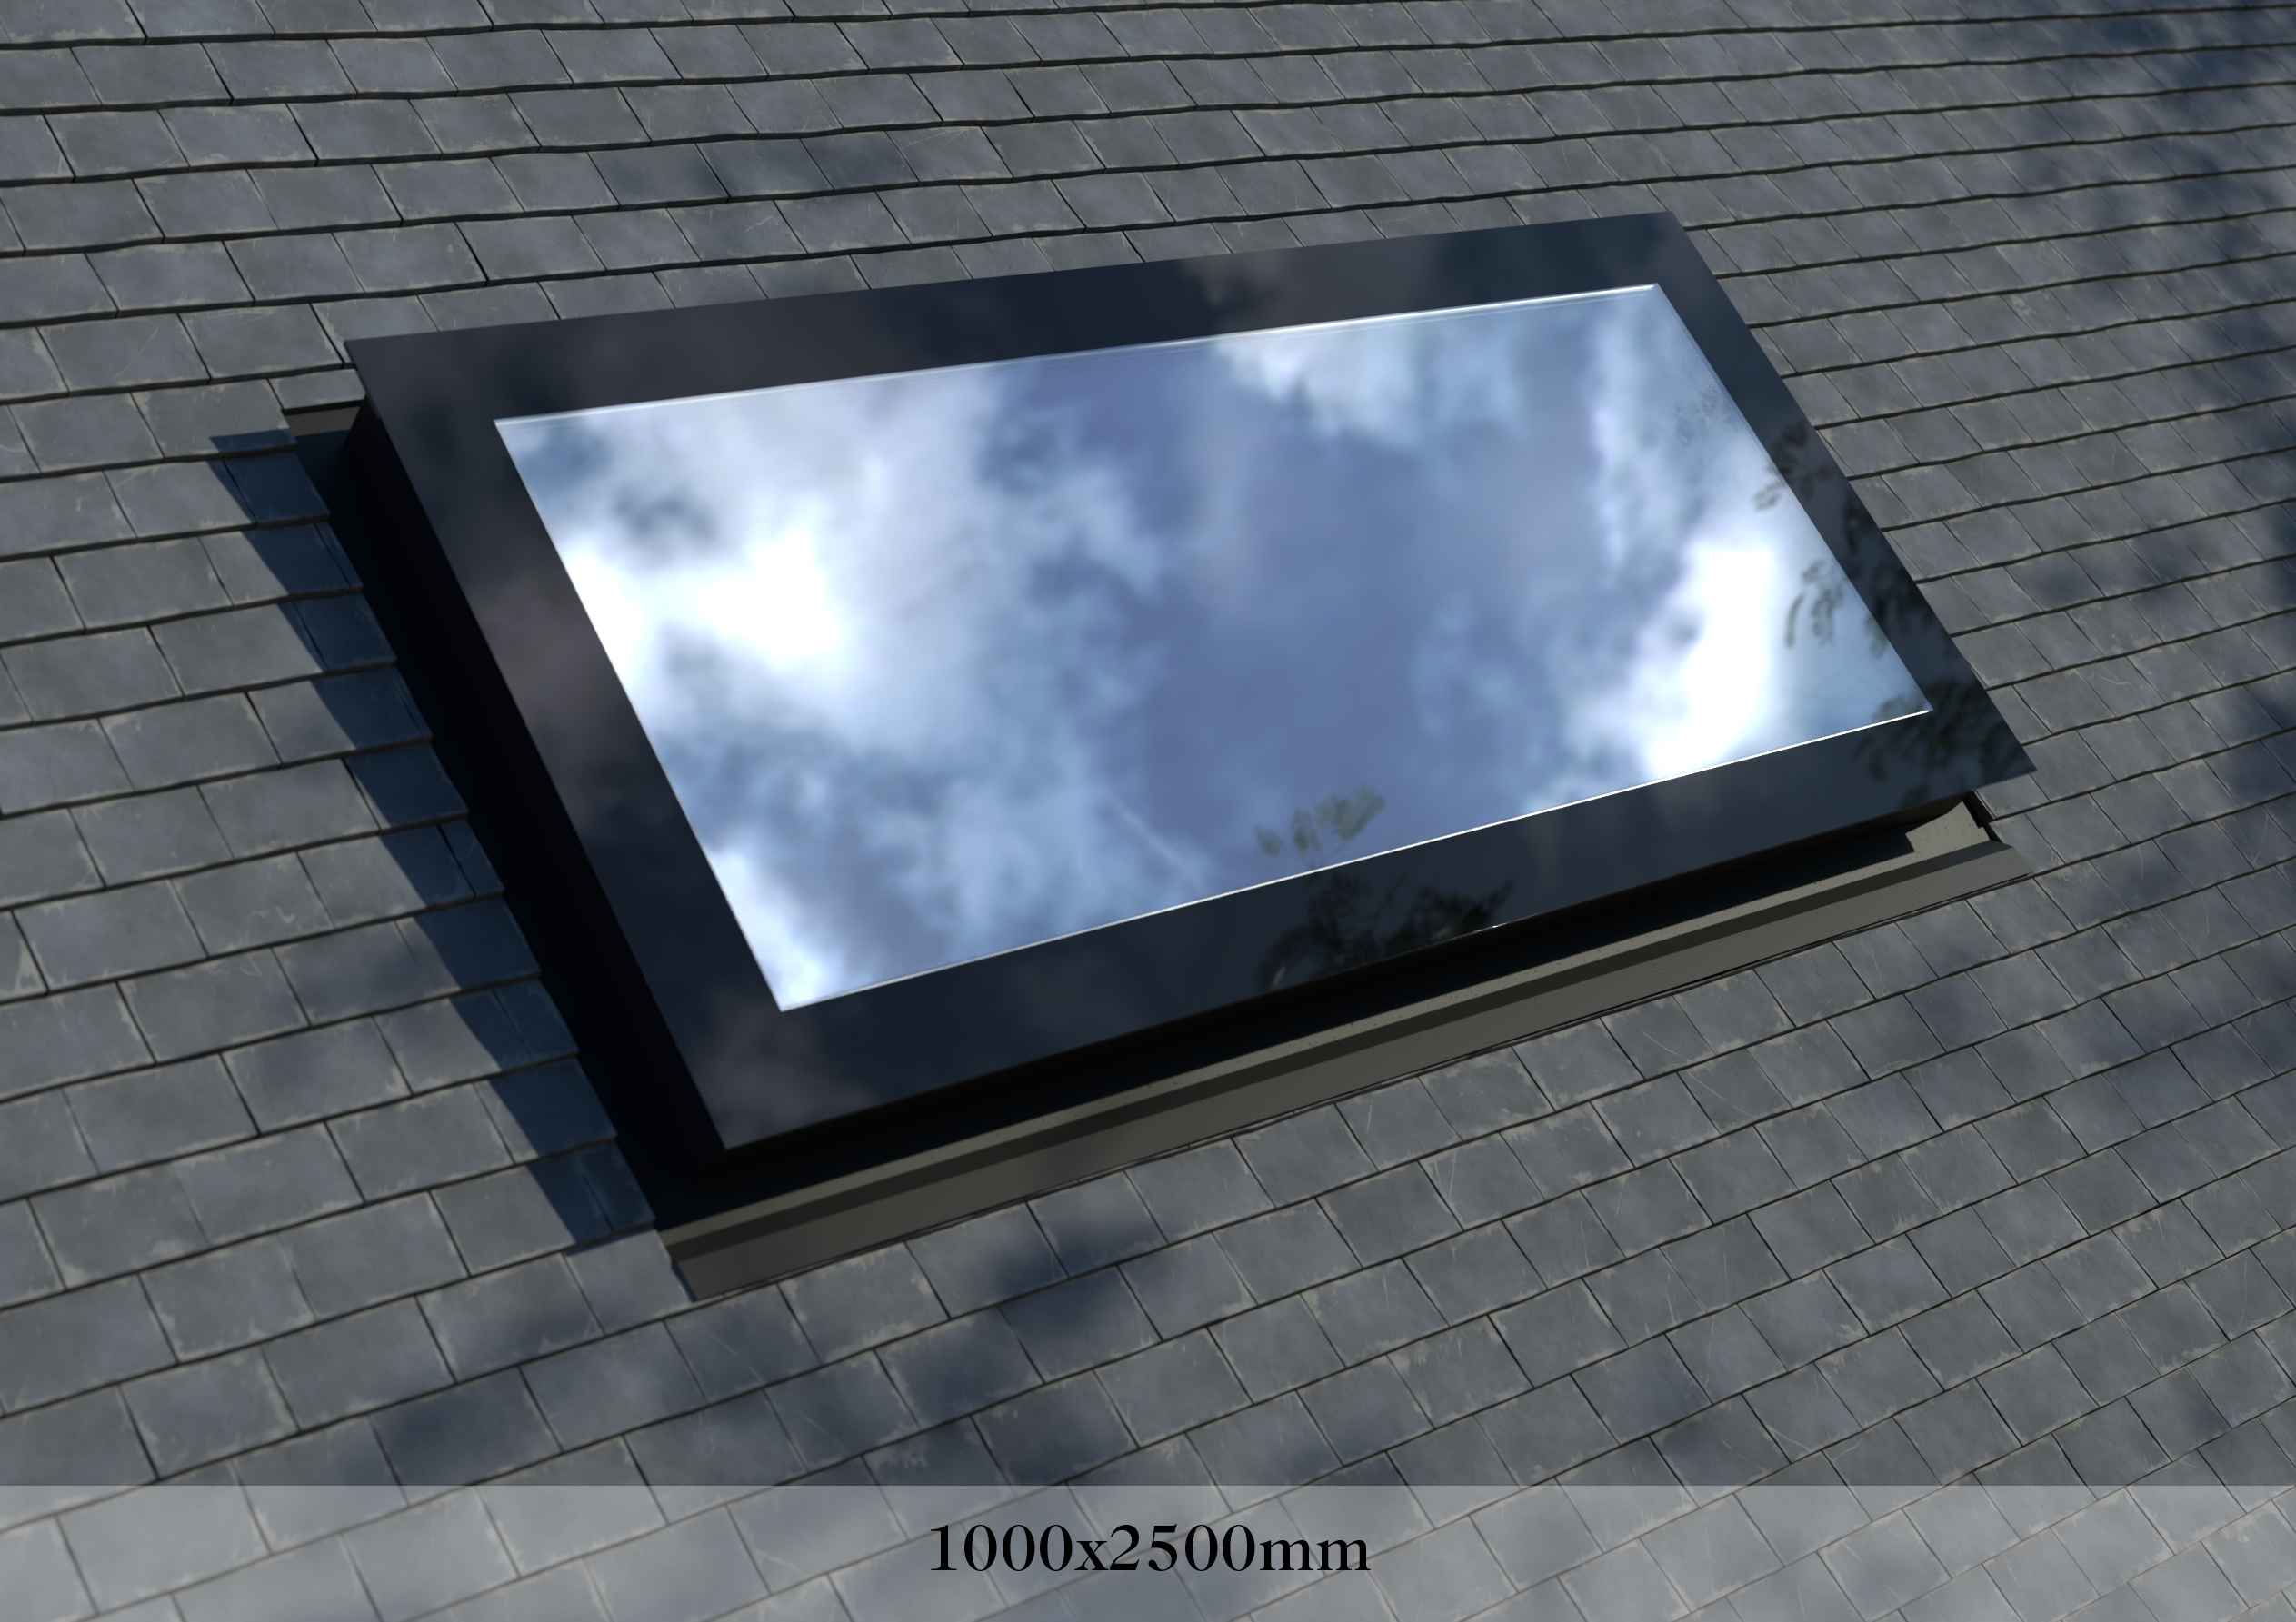 Pitched Roof Skylight 1000 x 2500mm